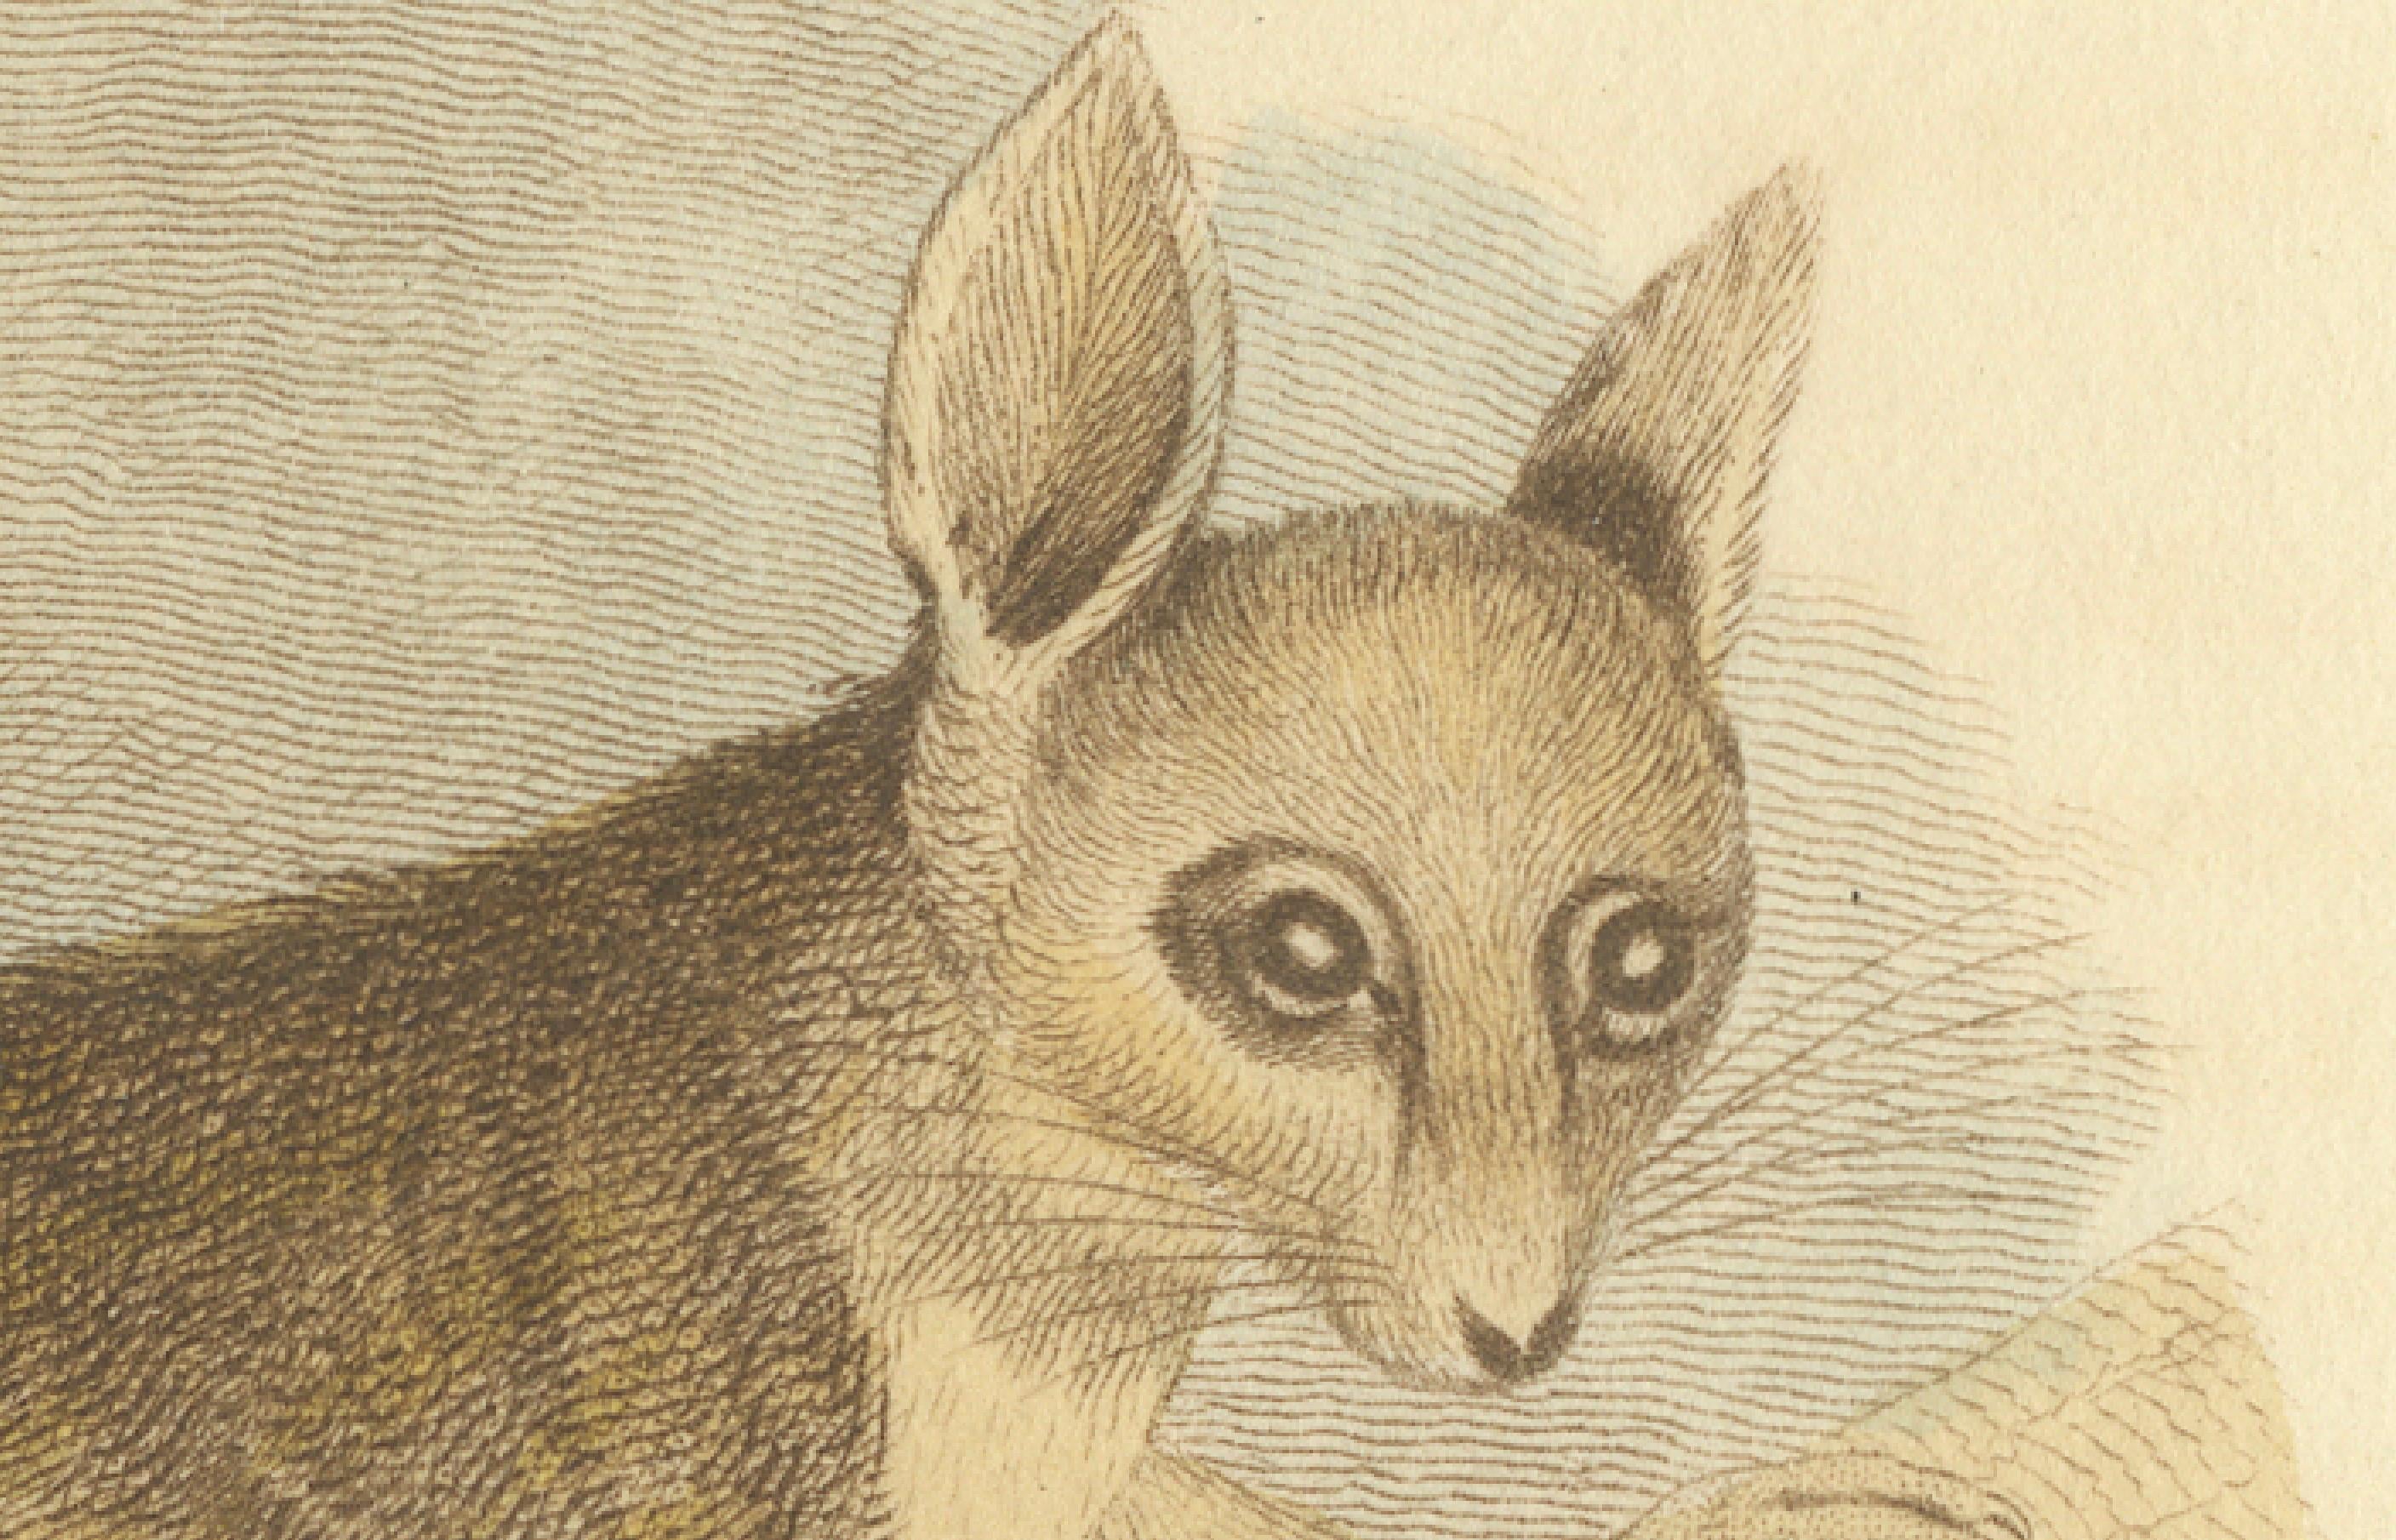 The image portrays an antique print of a creature identified as 